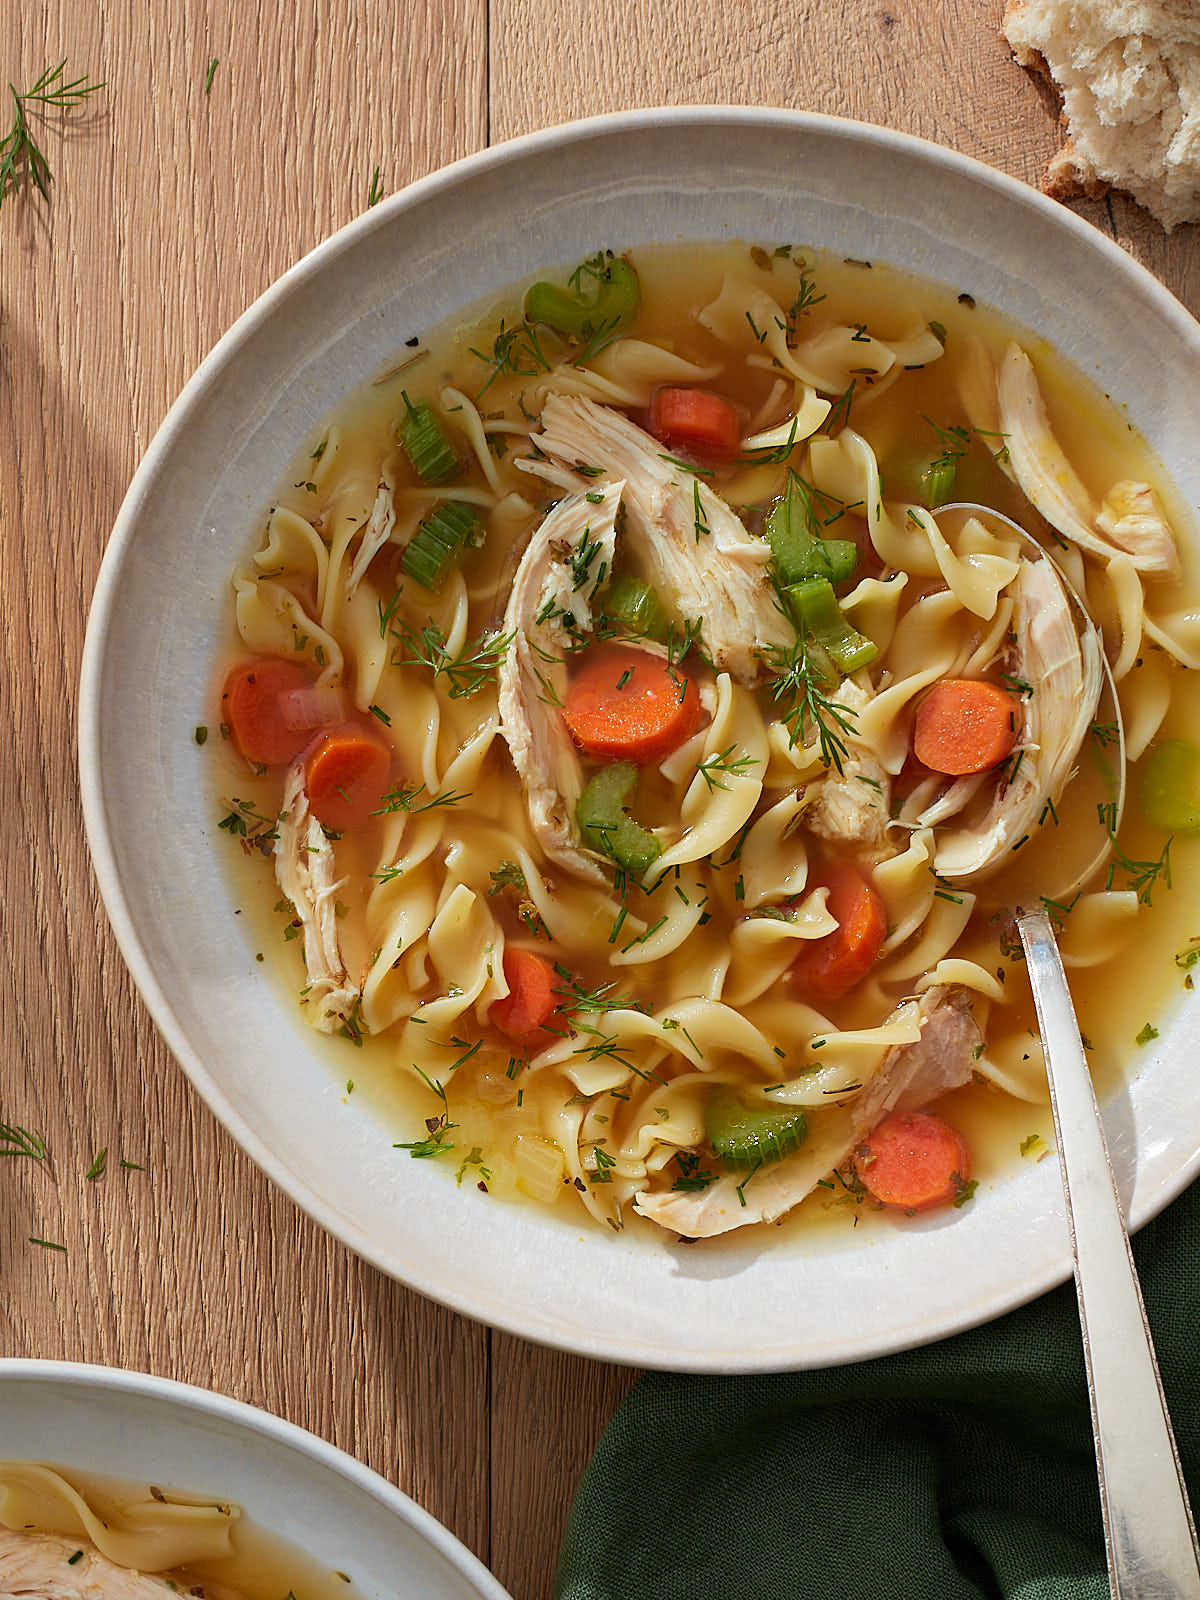 Homemade chicken noodle soup in a large bowl on a wooden table.